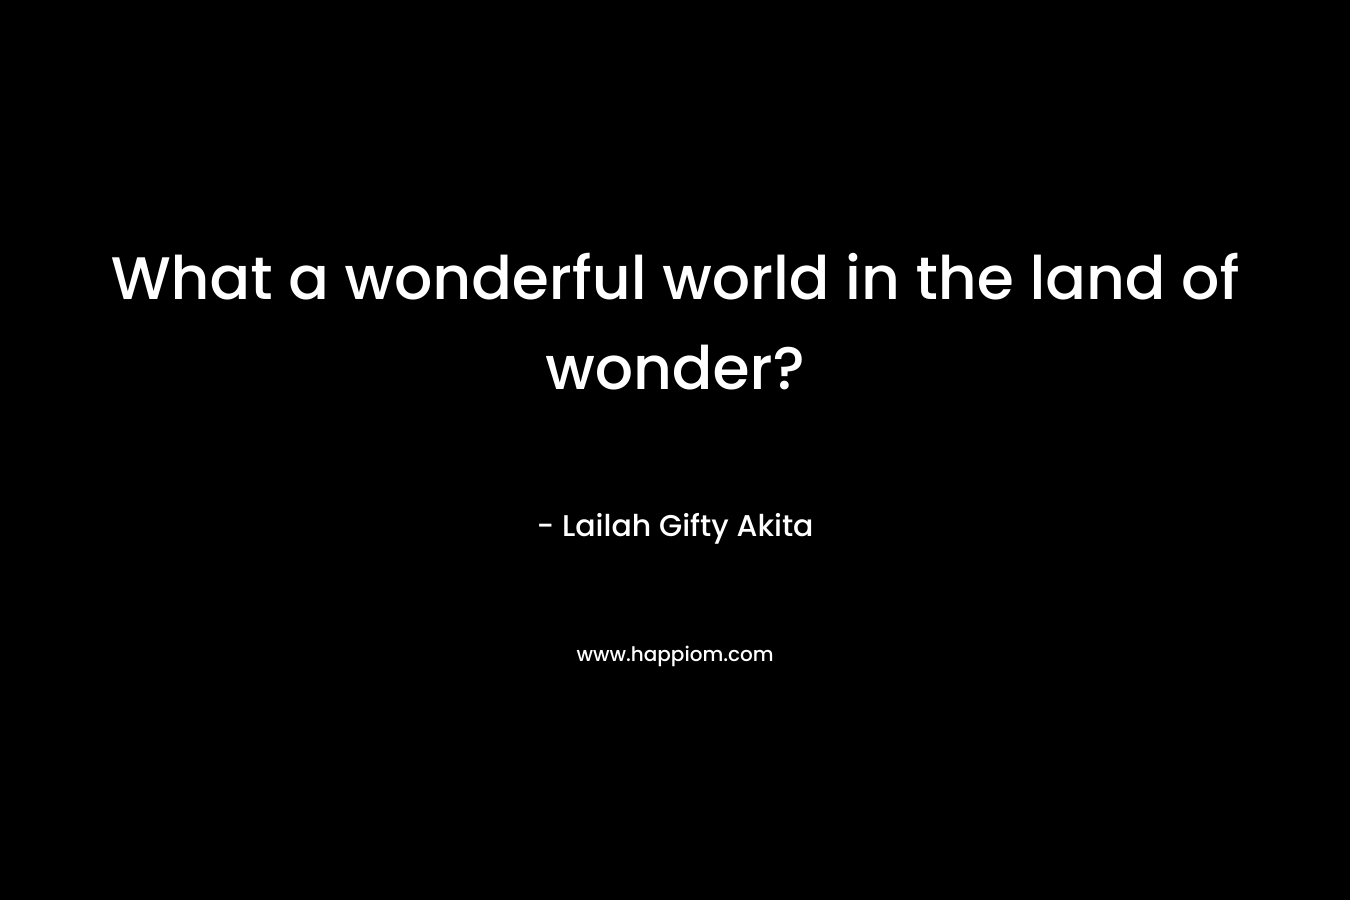 What a wonderful world in the land of wonder?